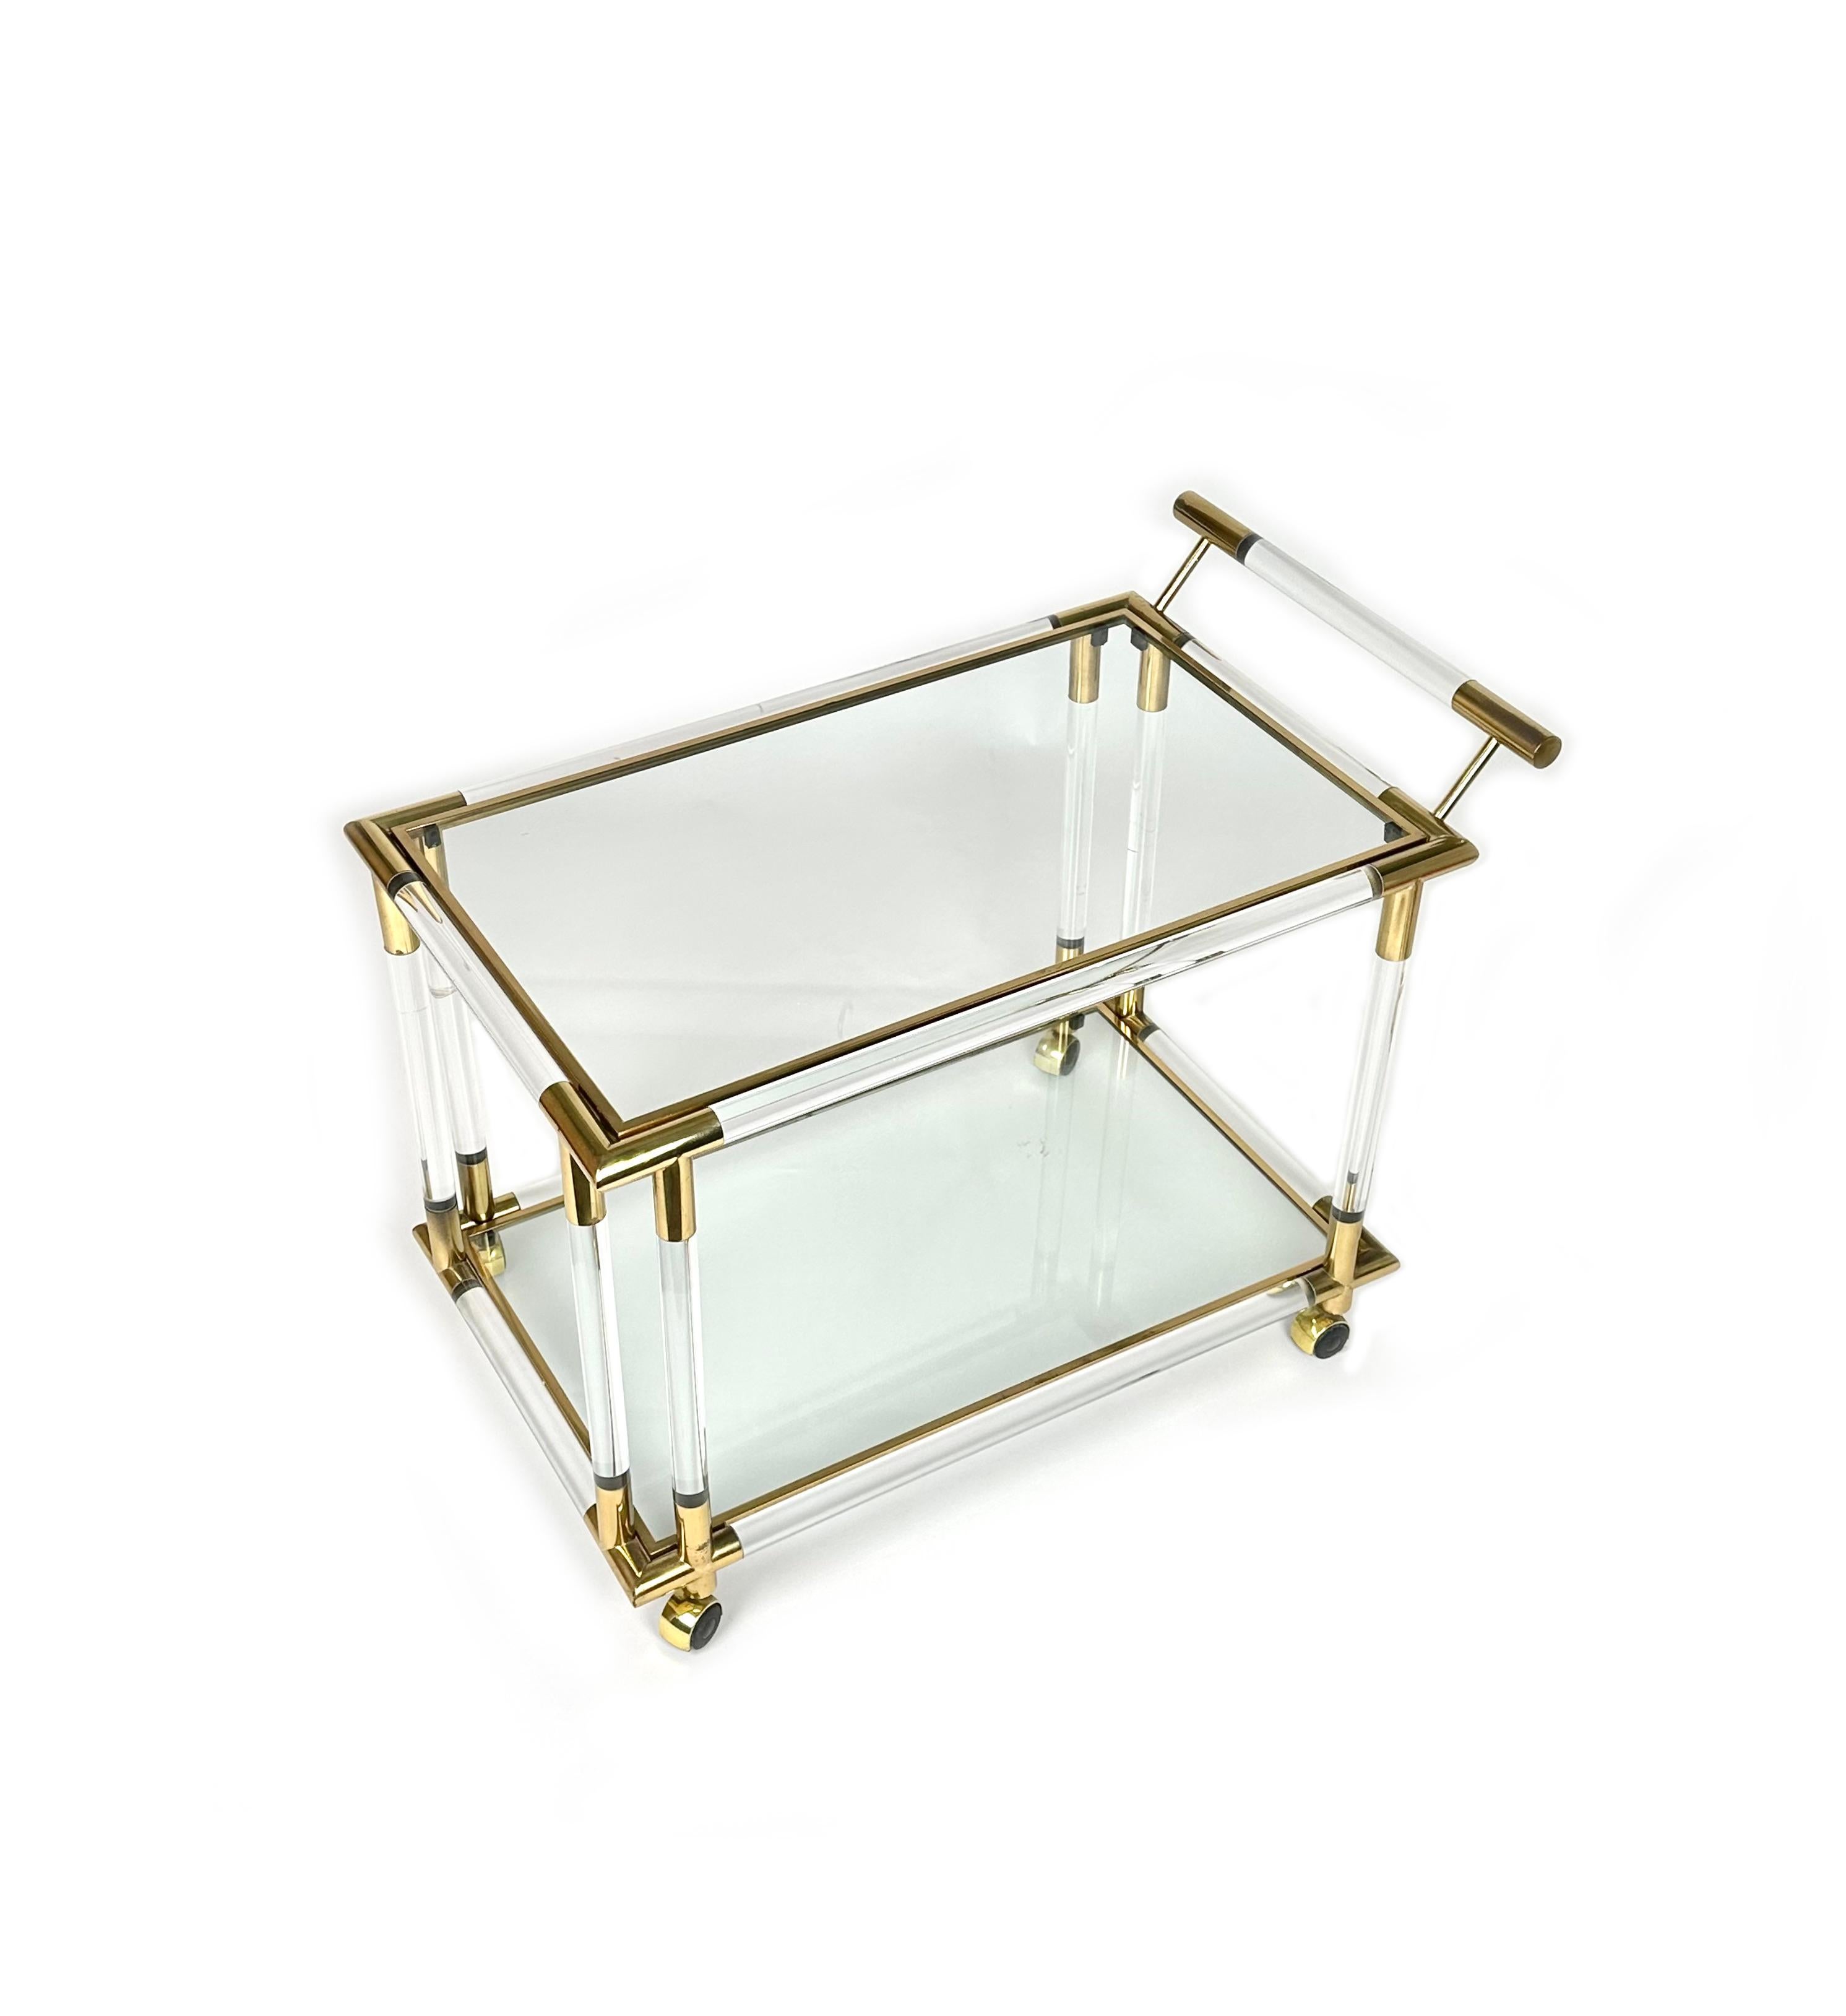 midcentury serving bar cart in the style of Charles Hollis Jones, made in Italy in the 1970s.

This two-tiered serving trolley features solid round tubes of lucite (Acrylic) with polished brass corner trim and handle details as well as two clear